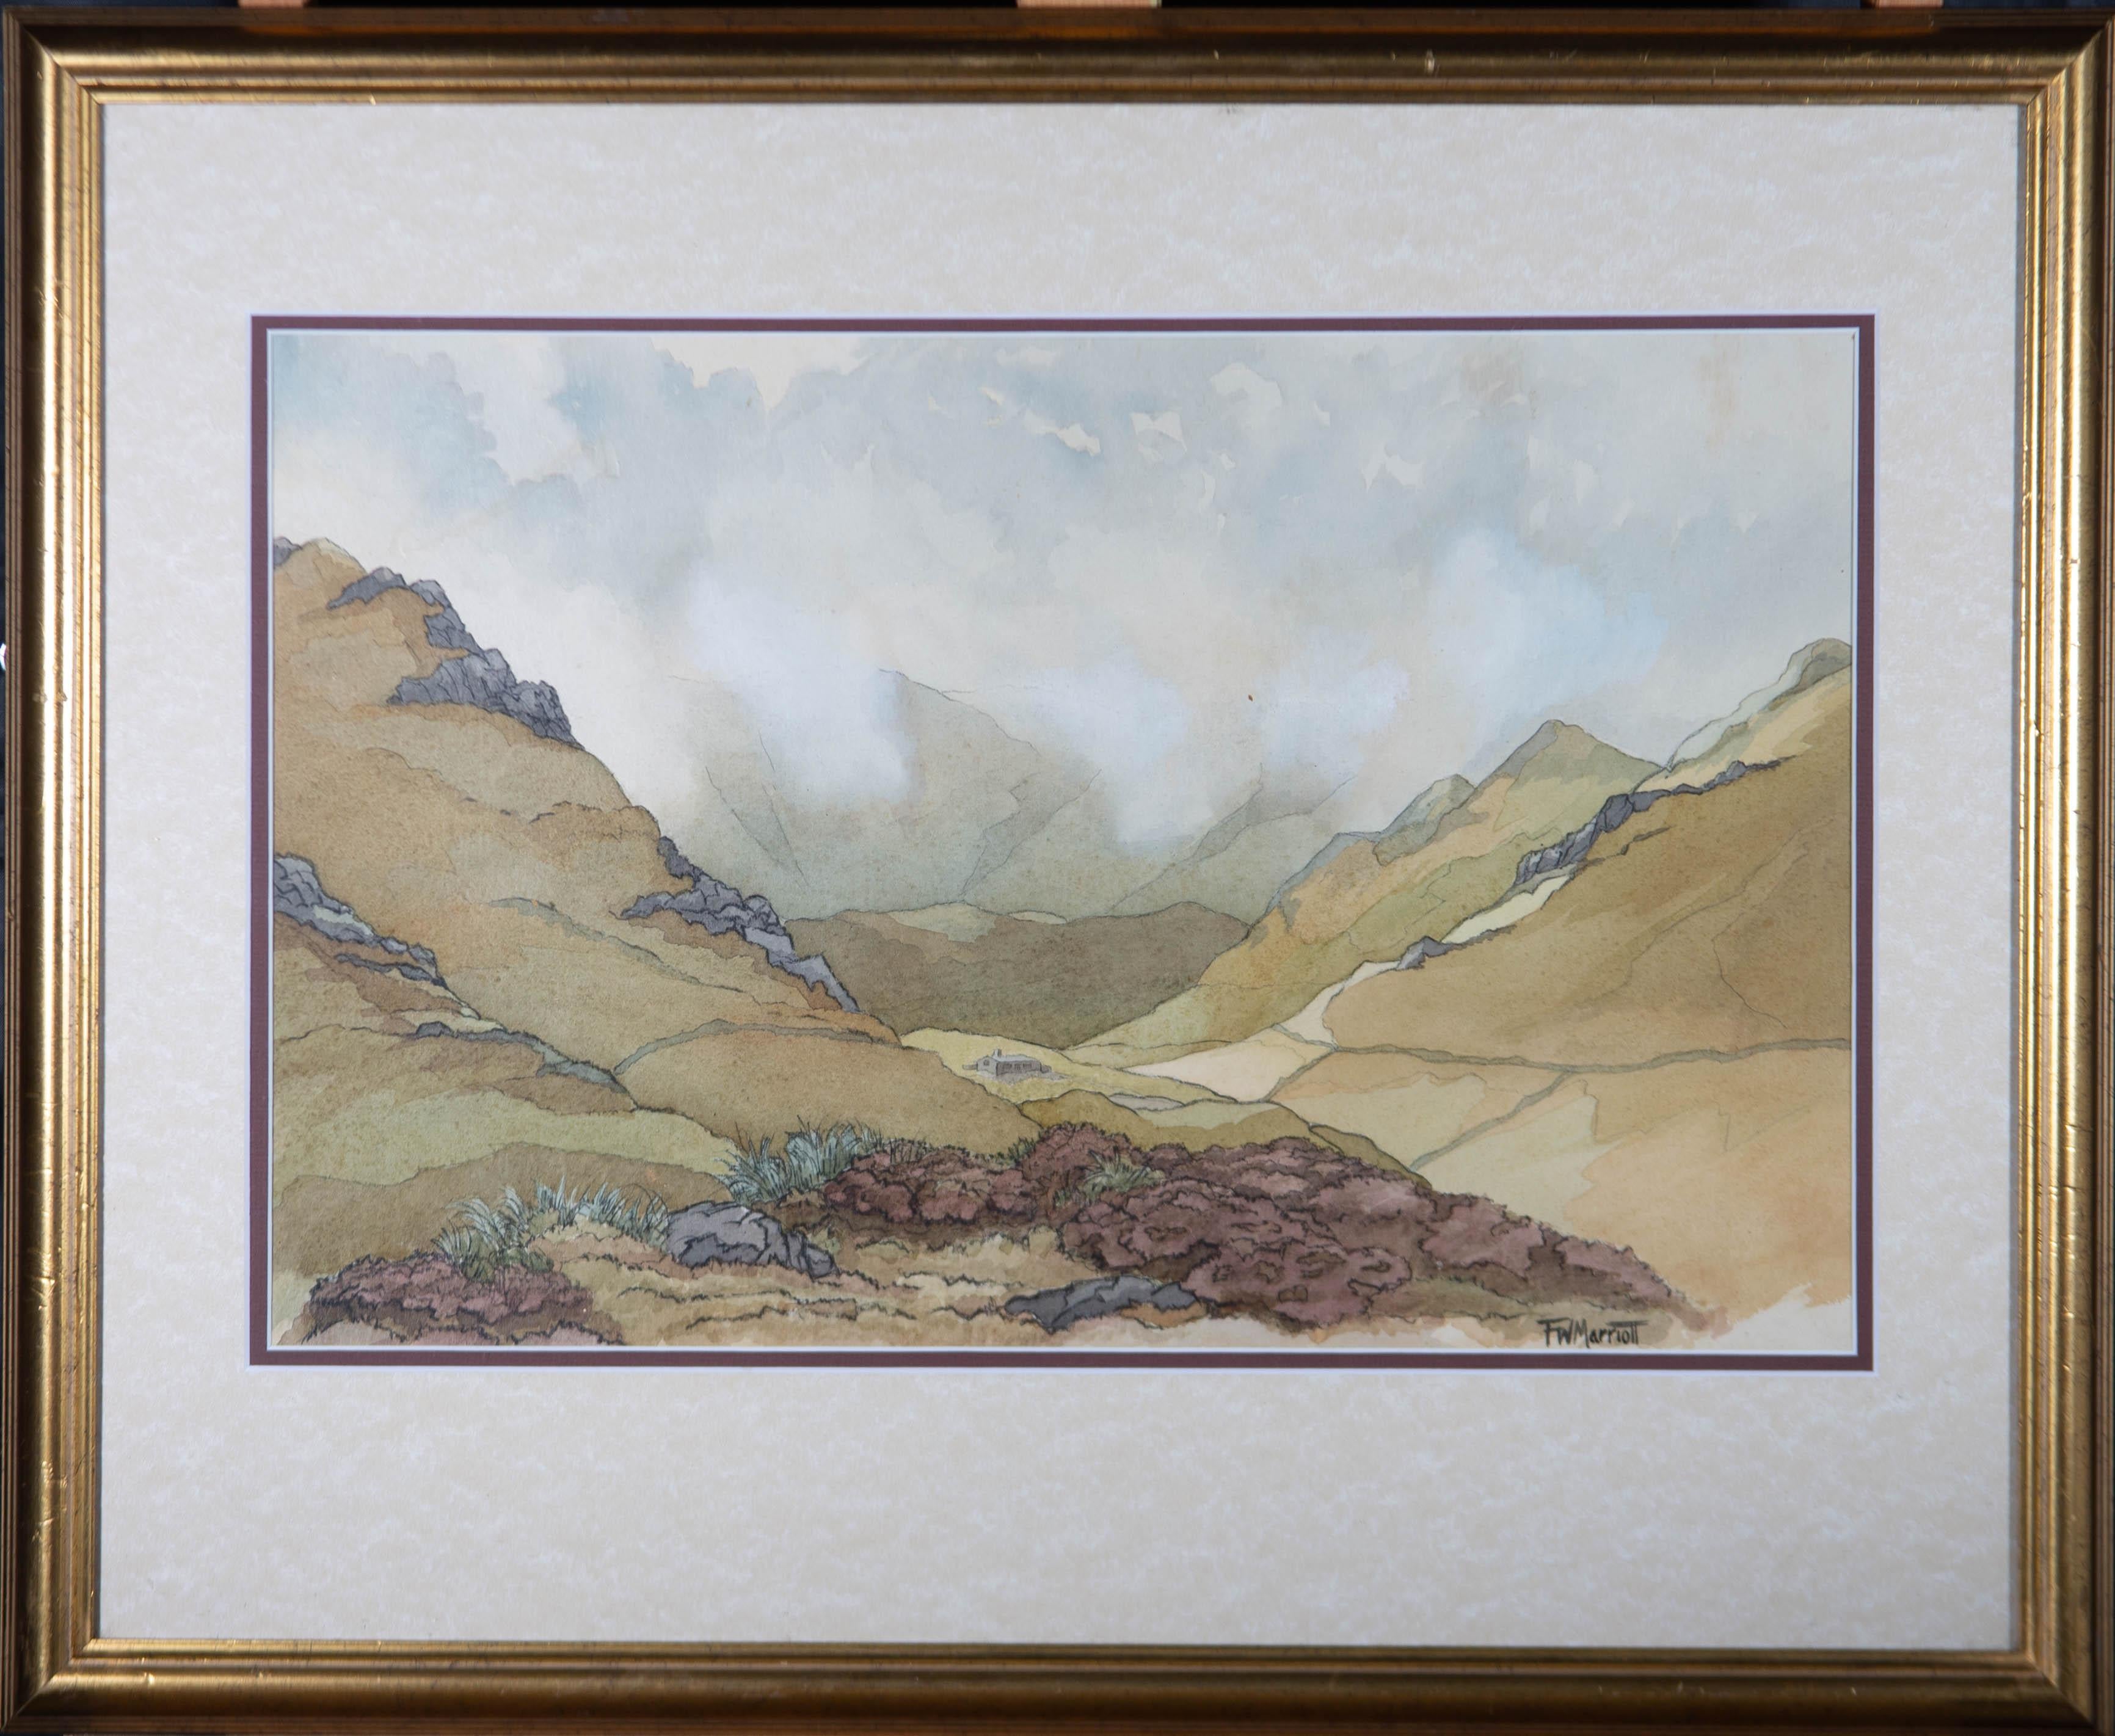 A landscape depicting an isolated farmstead in a cloudy moorland valley. Presented glazed in a cream and maroon double mount and a distressed gilt-effect wooden frame. Signed to the lower-right edge. On watercolour paper.
